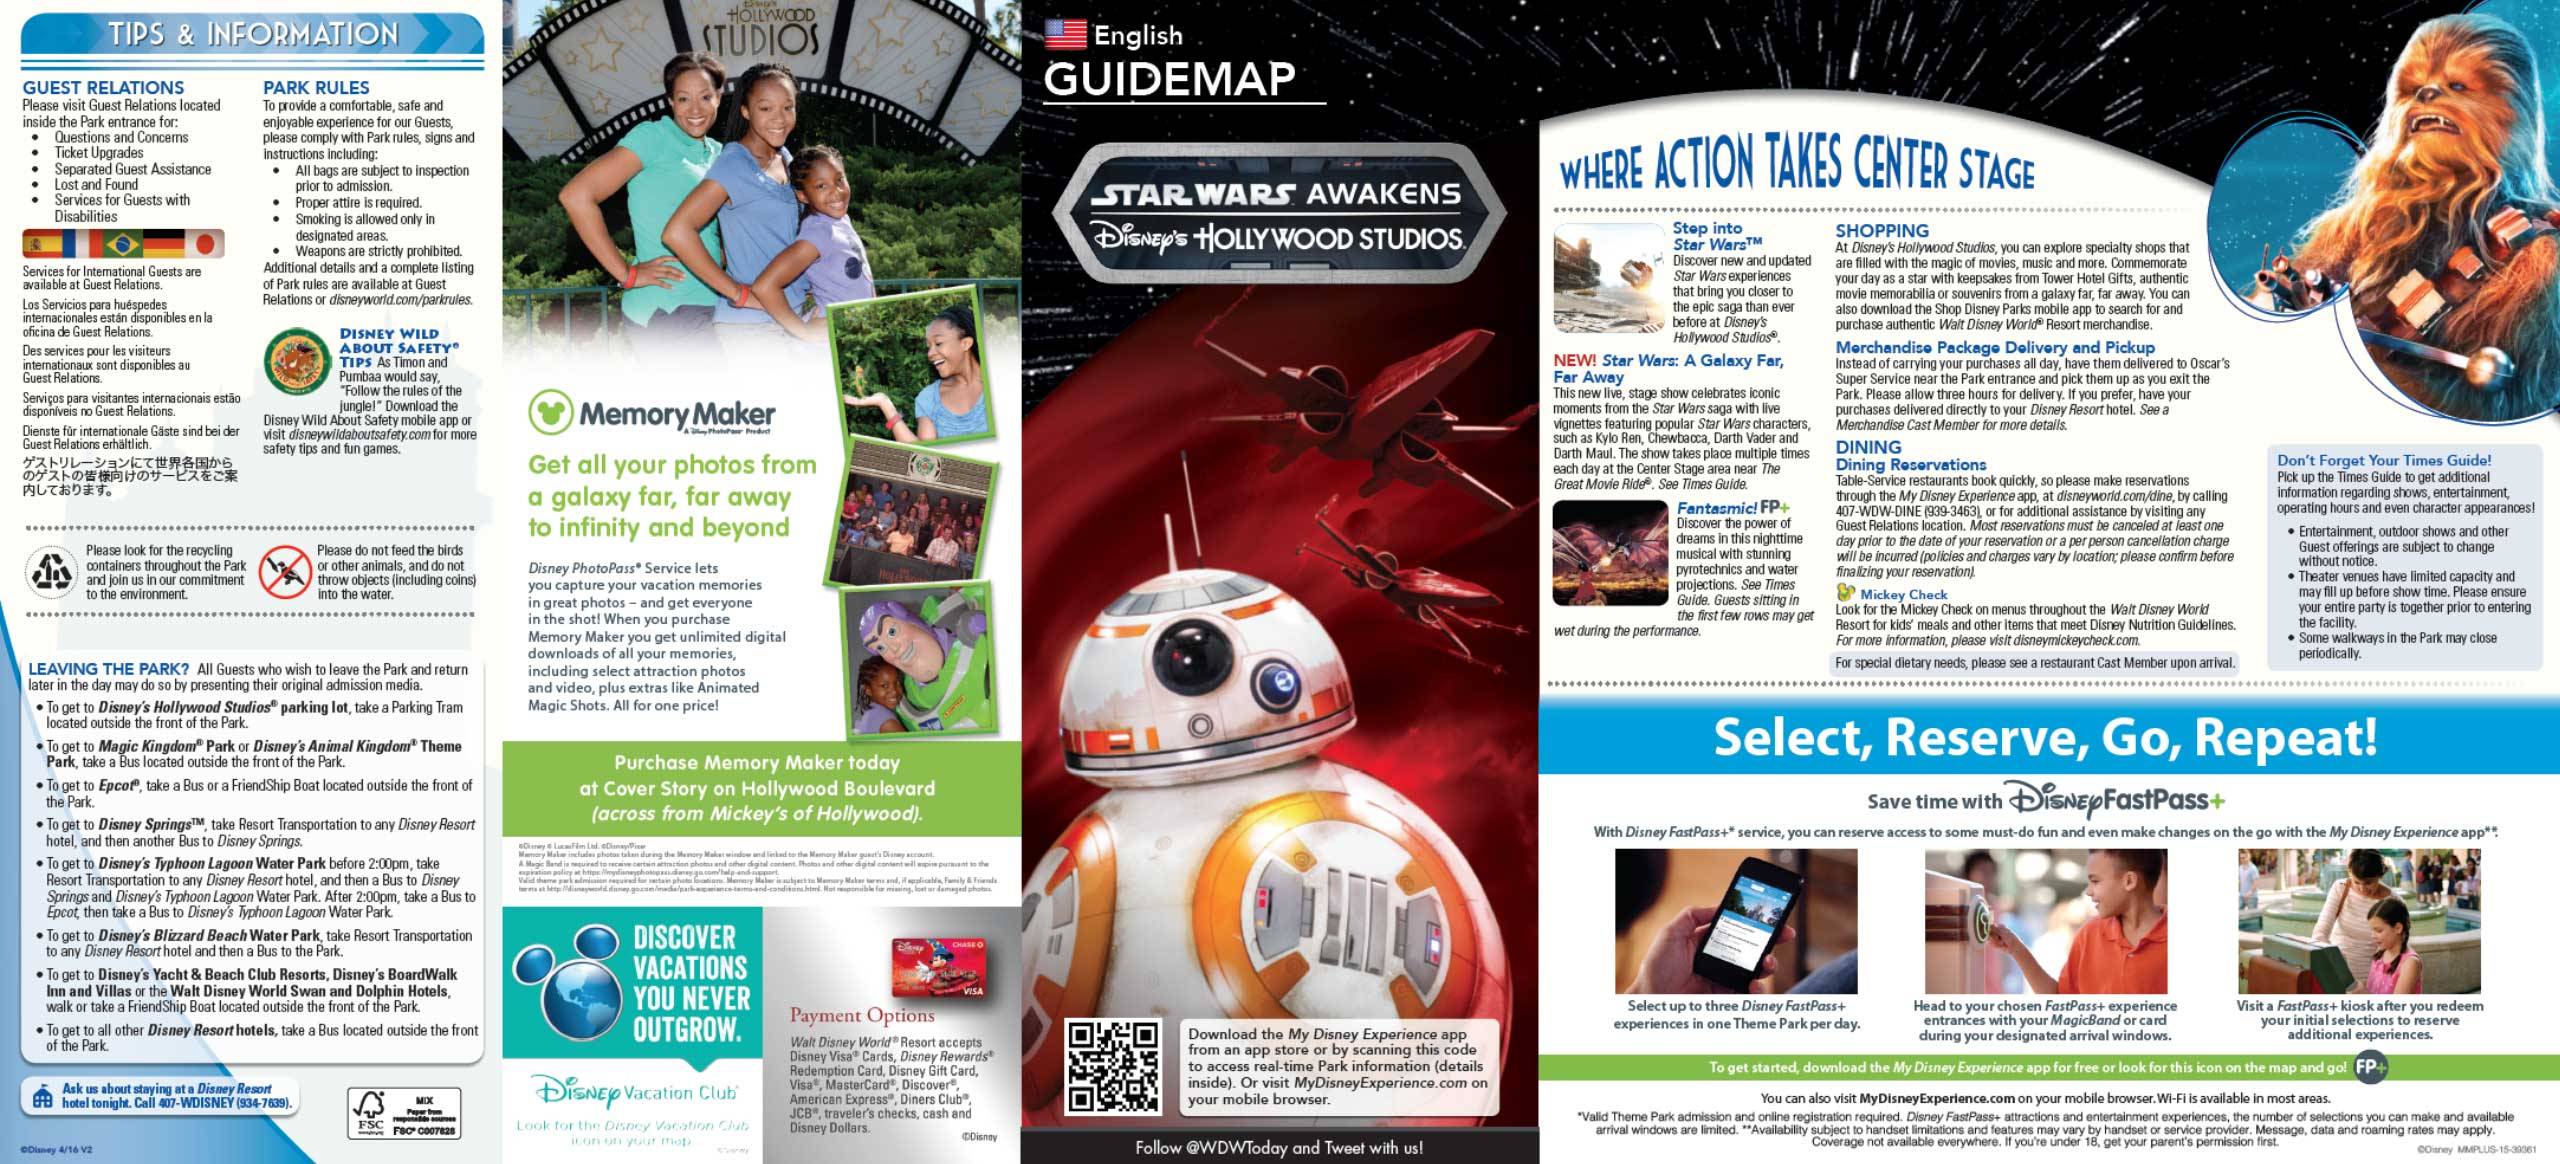 Disney's Hollywood Studios Guide Map May 2016 - Front